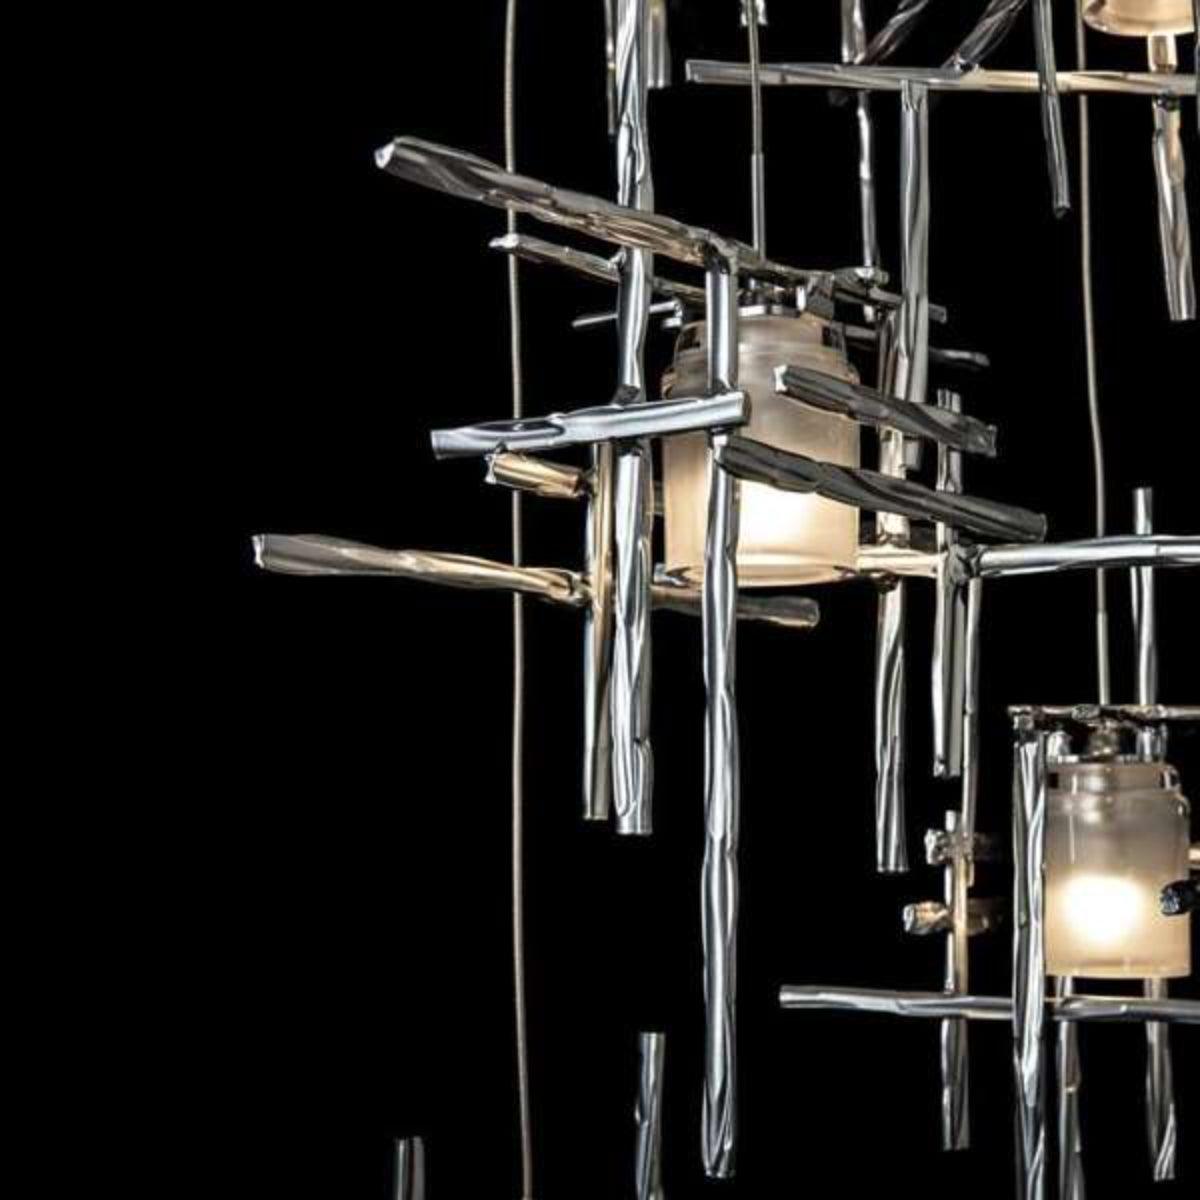 Tura 5 lights Pendant Light with Standard Height Seeded Glass